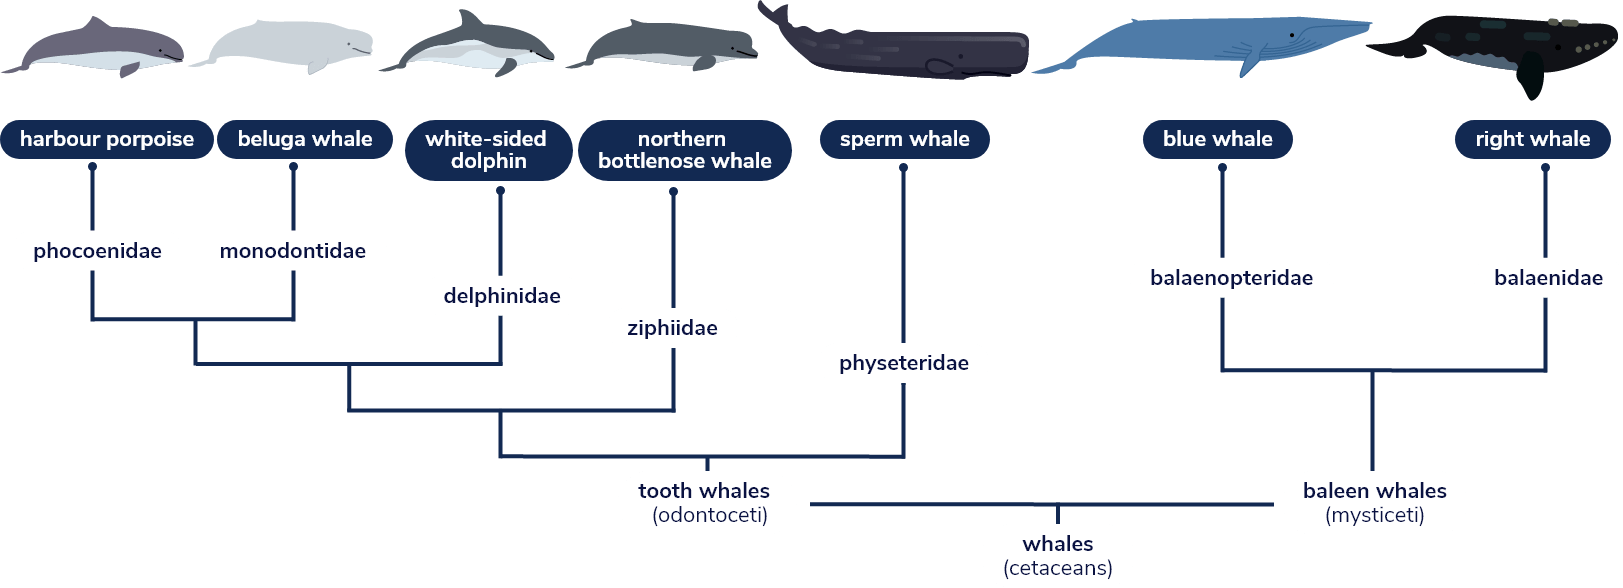 Phylogenetic tree of cetaceans. A first branch appears when toothed whales (odontocetes) diverged from the baleen whales (mysticetes). In baleen whales, a branch separates members of the family Balaenopteridae (e.g. blue whale) from those of the family Balaenidae (e.g. right whale). With regard to toothed whales, a first branch separates the family Physeteridae (e.g. sperm whale) from the others, a second branch is represented by Ziphiidae (e.g. bottlenose whale), a third branch is represented by Delphinidae (e.g. white-sided dolphin) and a fourth branch is represented by Monodontidae (e.g. beluga) and Phocoenidae (e.g. harbour porpoise).